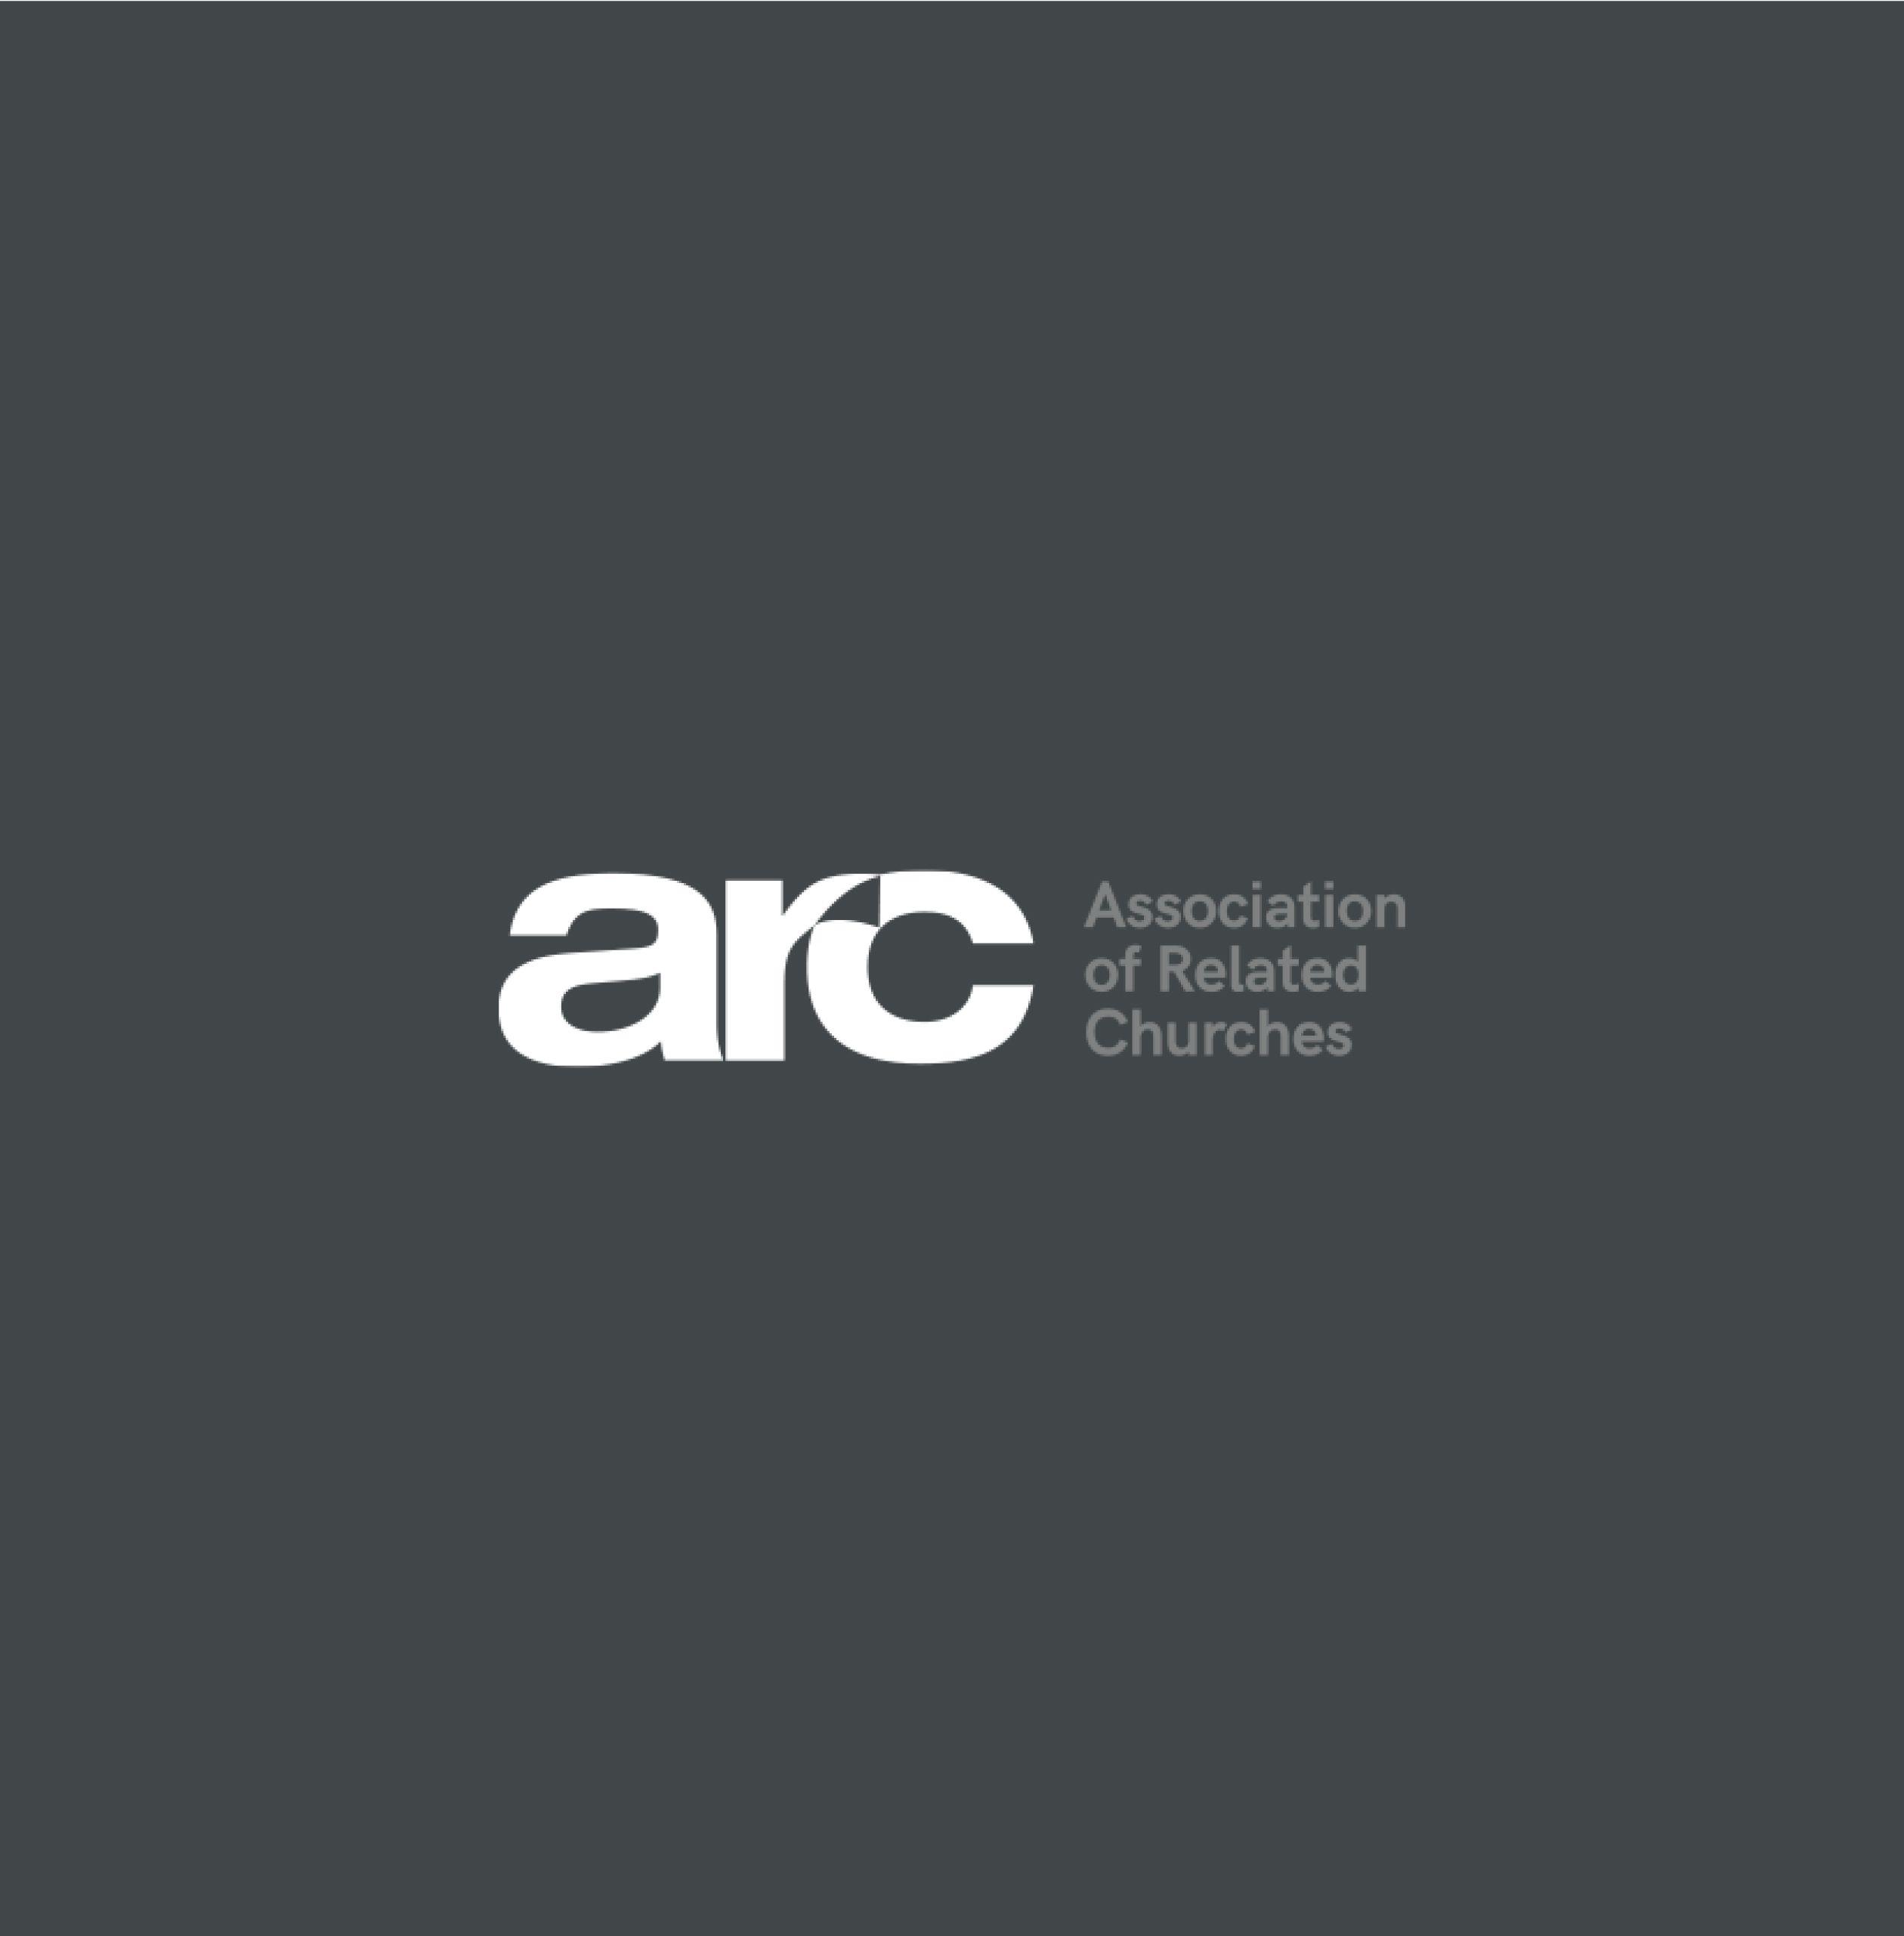 Association of Related Churches logo.